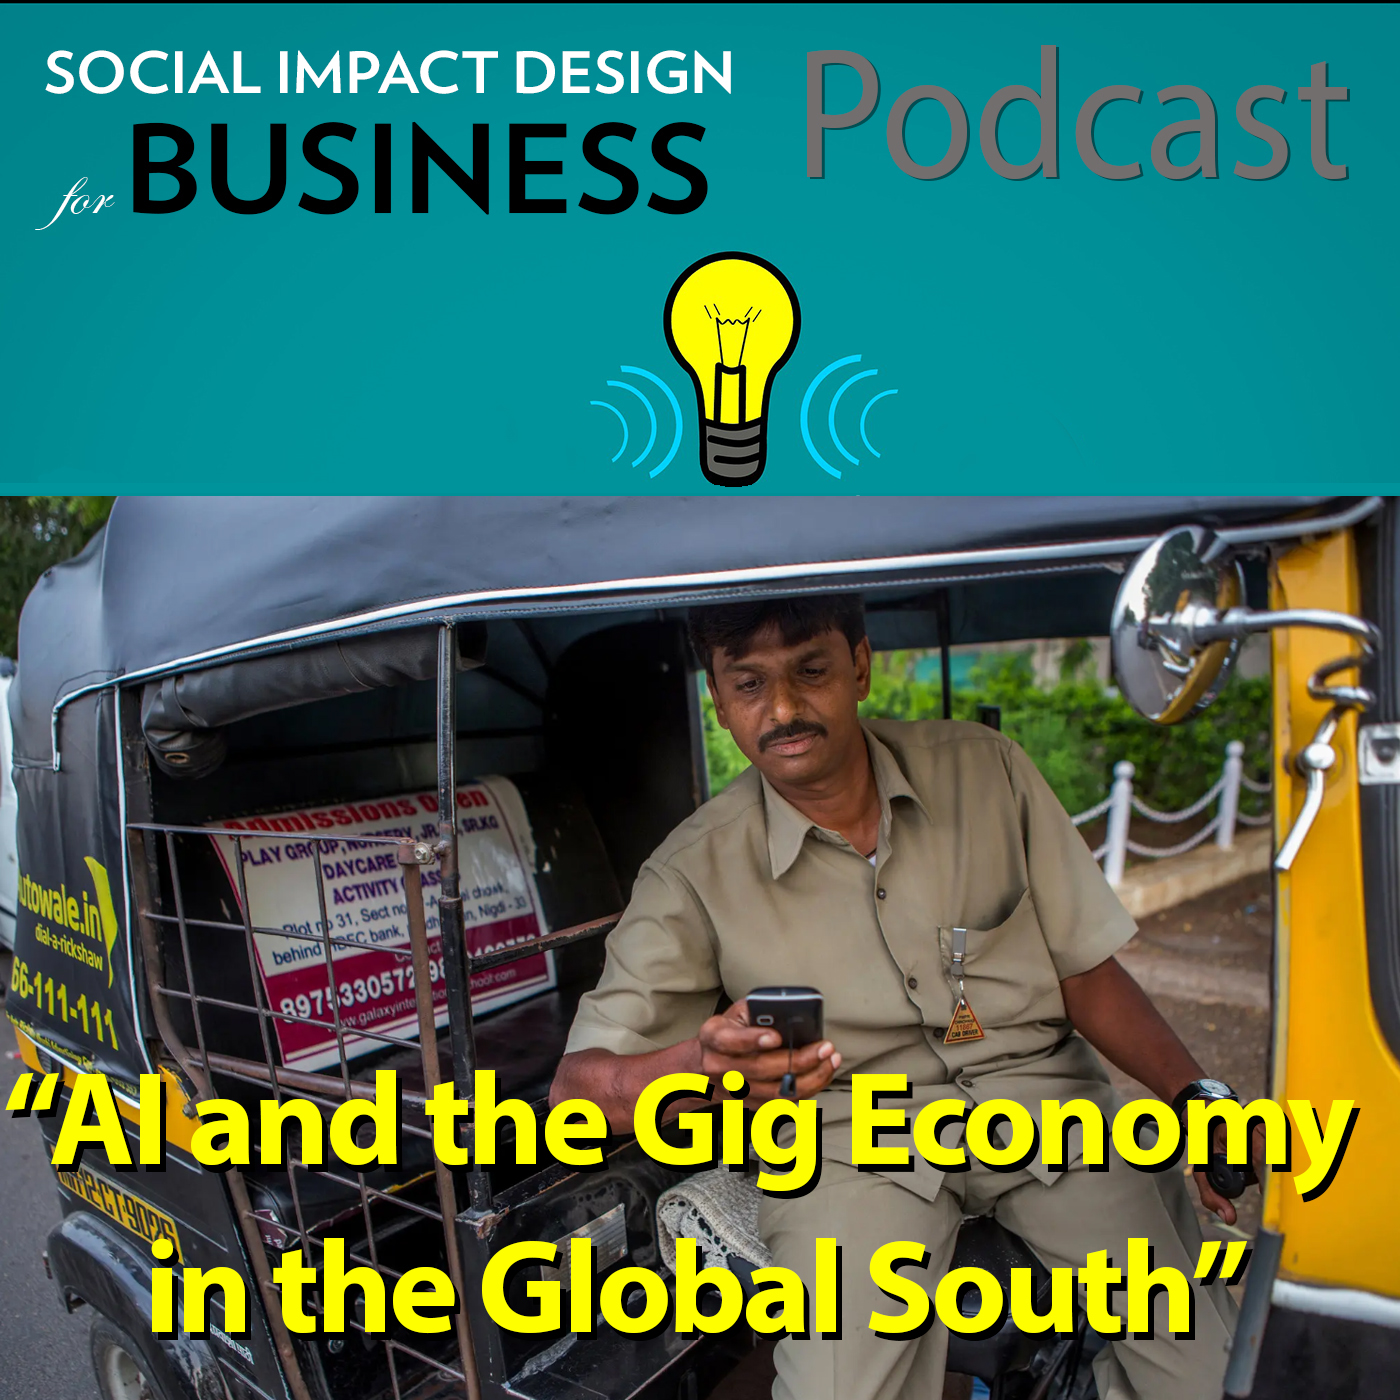 Podcast: AI and the Gig Economy in the Global South